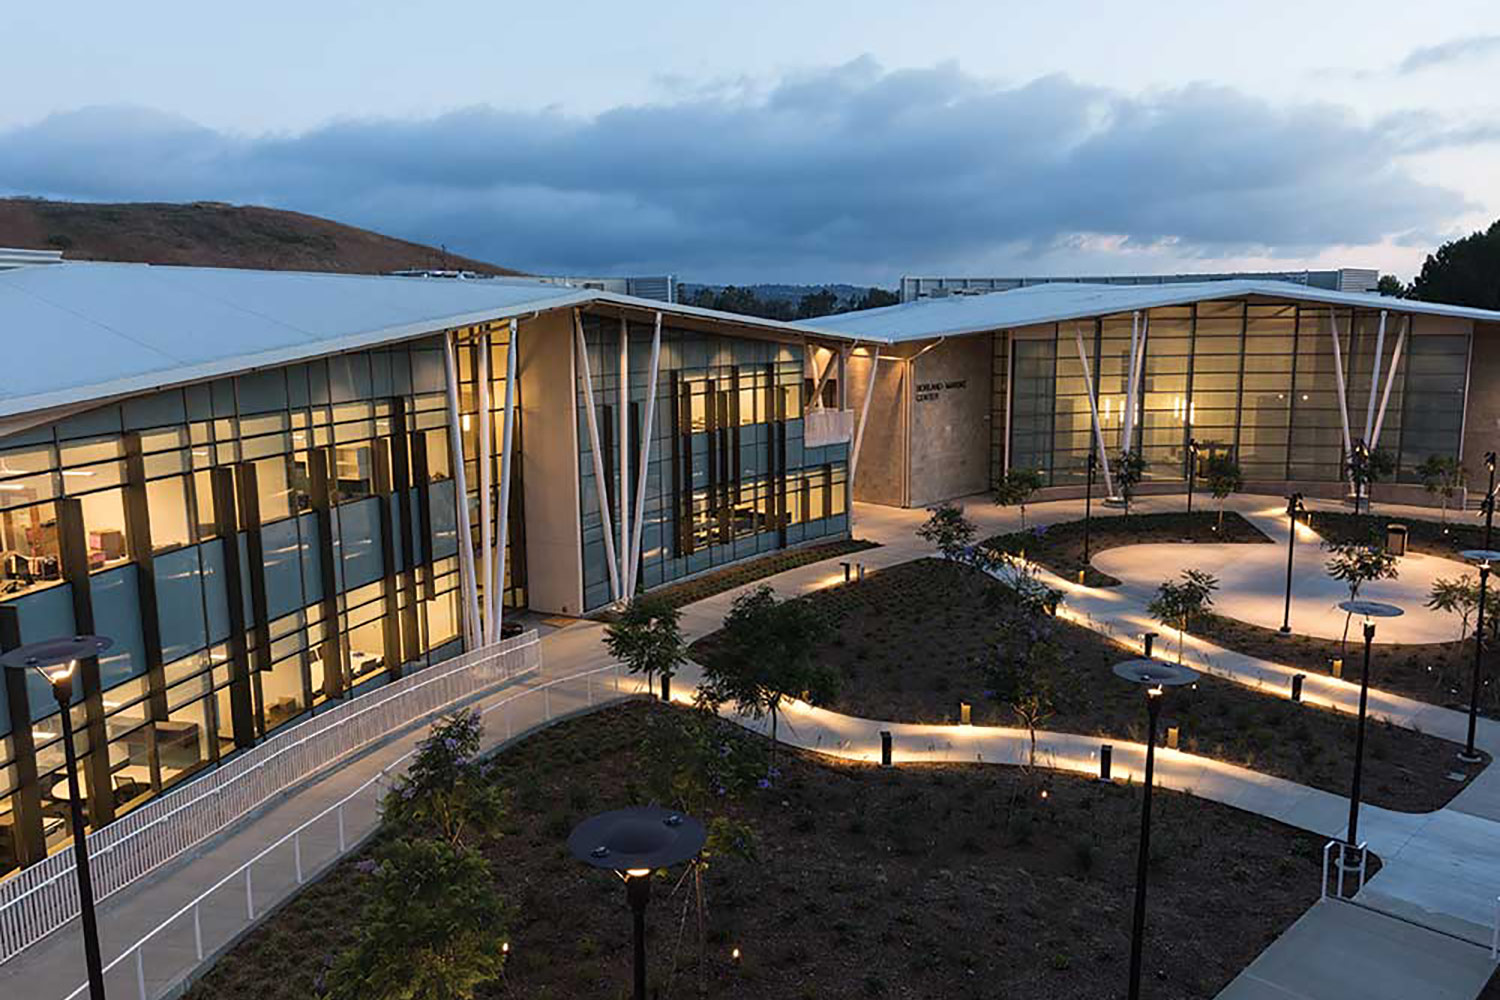 Concordia University Irvine, WSDG was commissioned for the design, acoustic consulting and systems integration of their new audio complex. CIU Exterior 2.